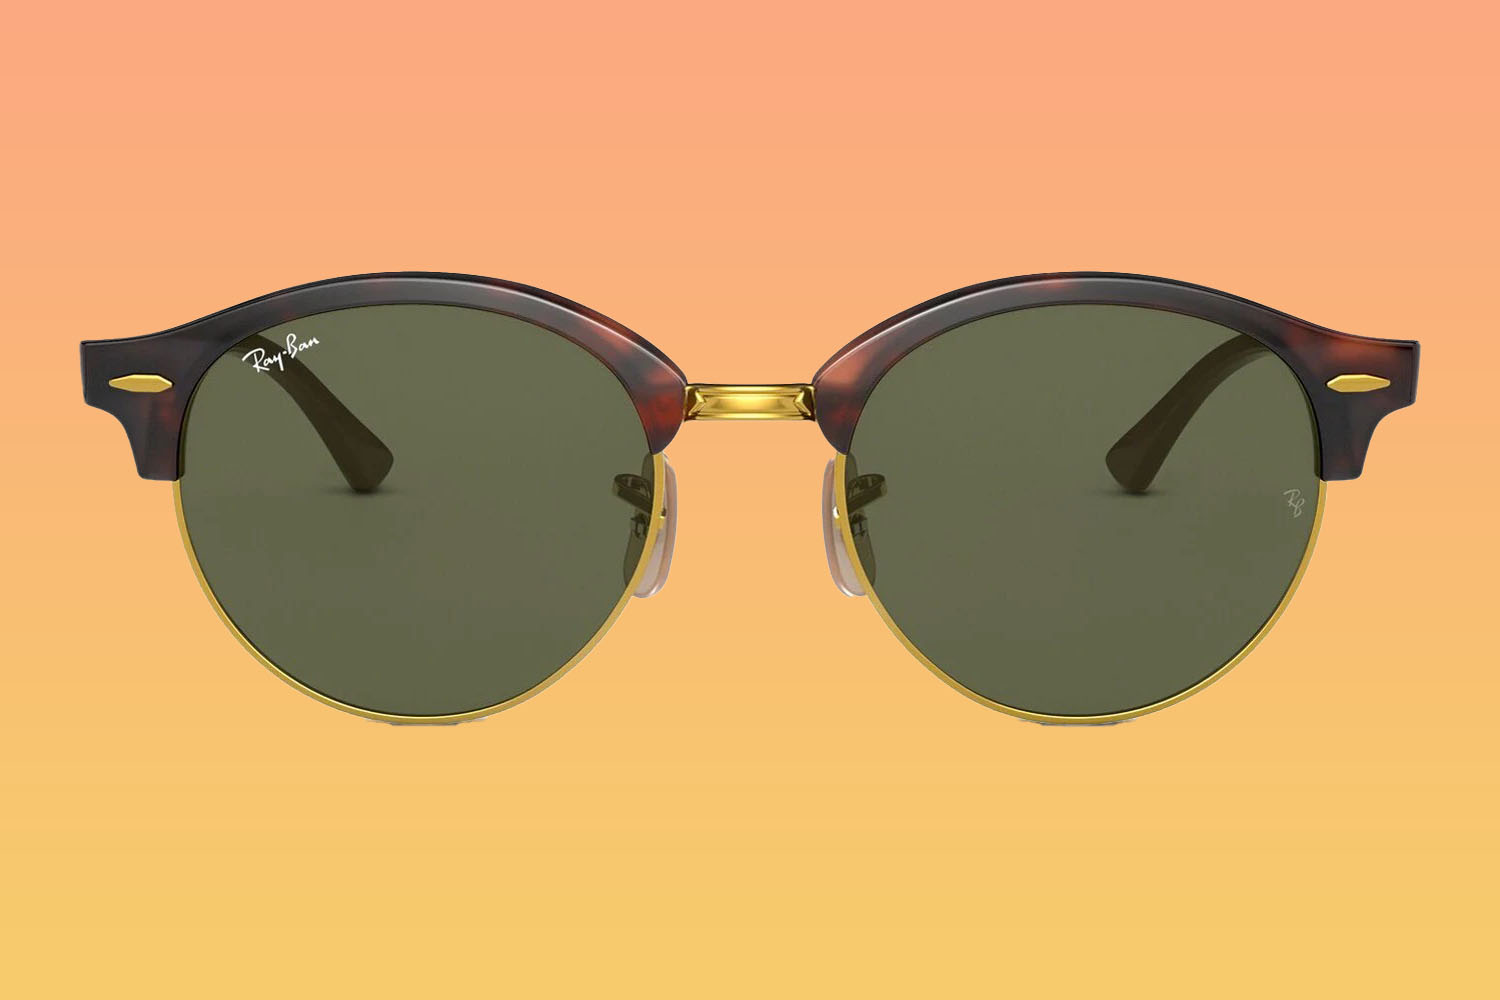 A pair of Ray-Ban sunglasses on a orange-to-yellow gradient background